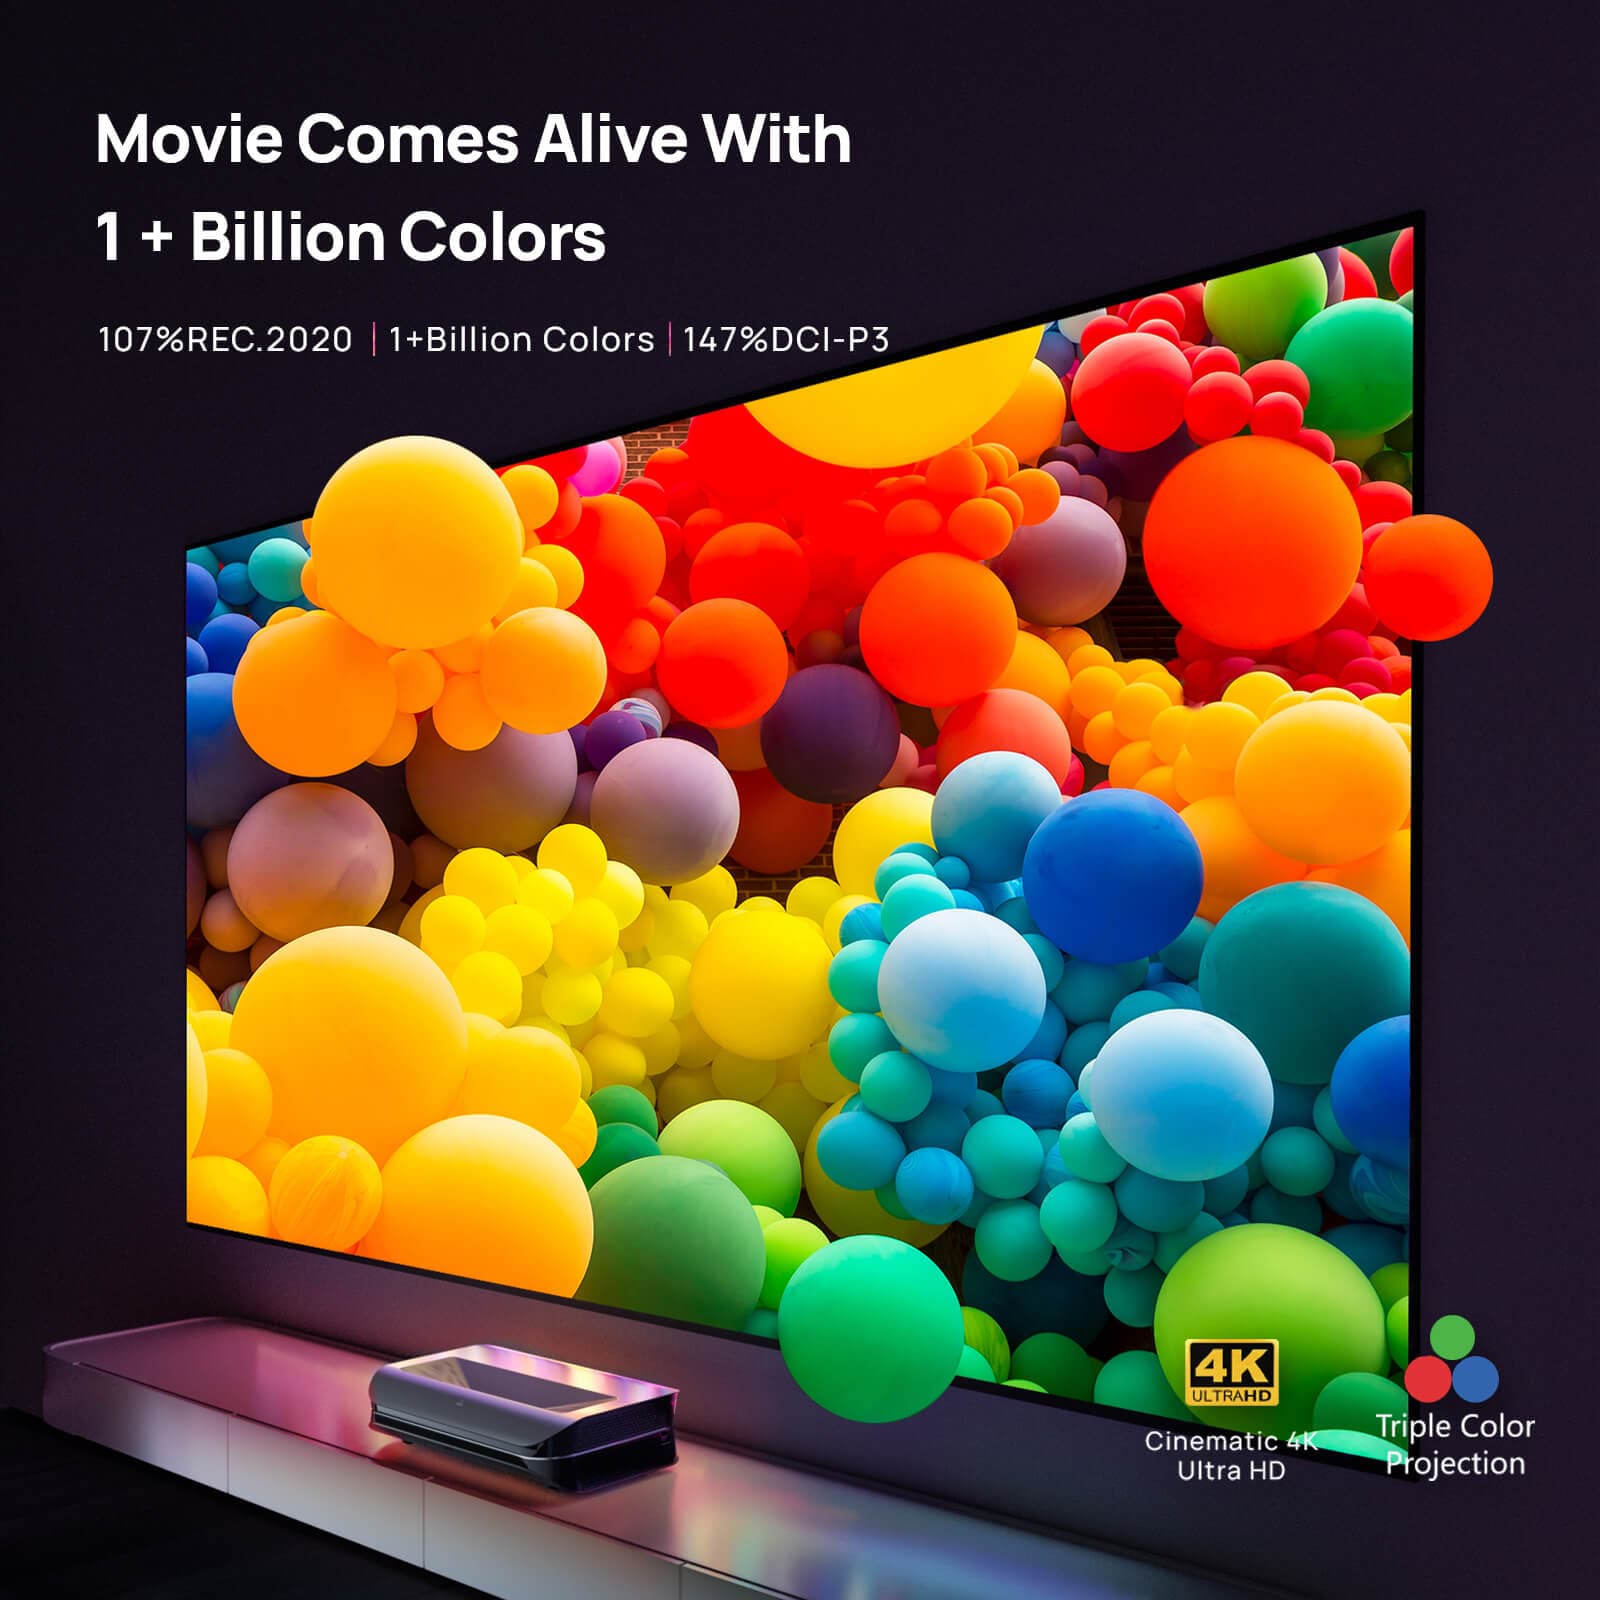 A vibrant display of over a billion colors on a high-definition projector screen, showcasing the exceptional color range of the AWOL Vision projector.